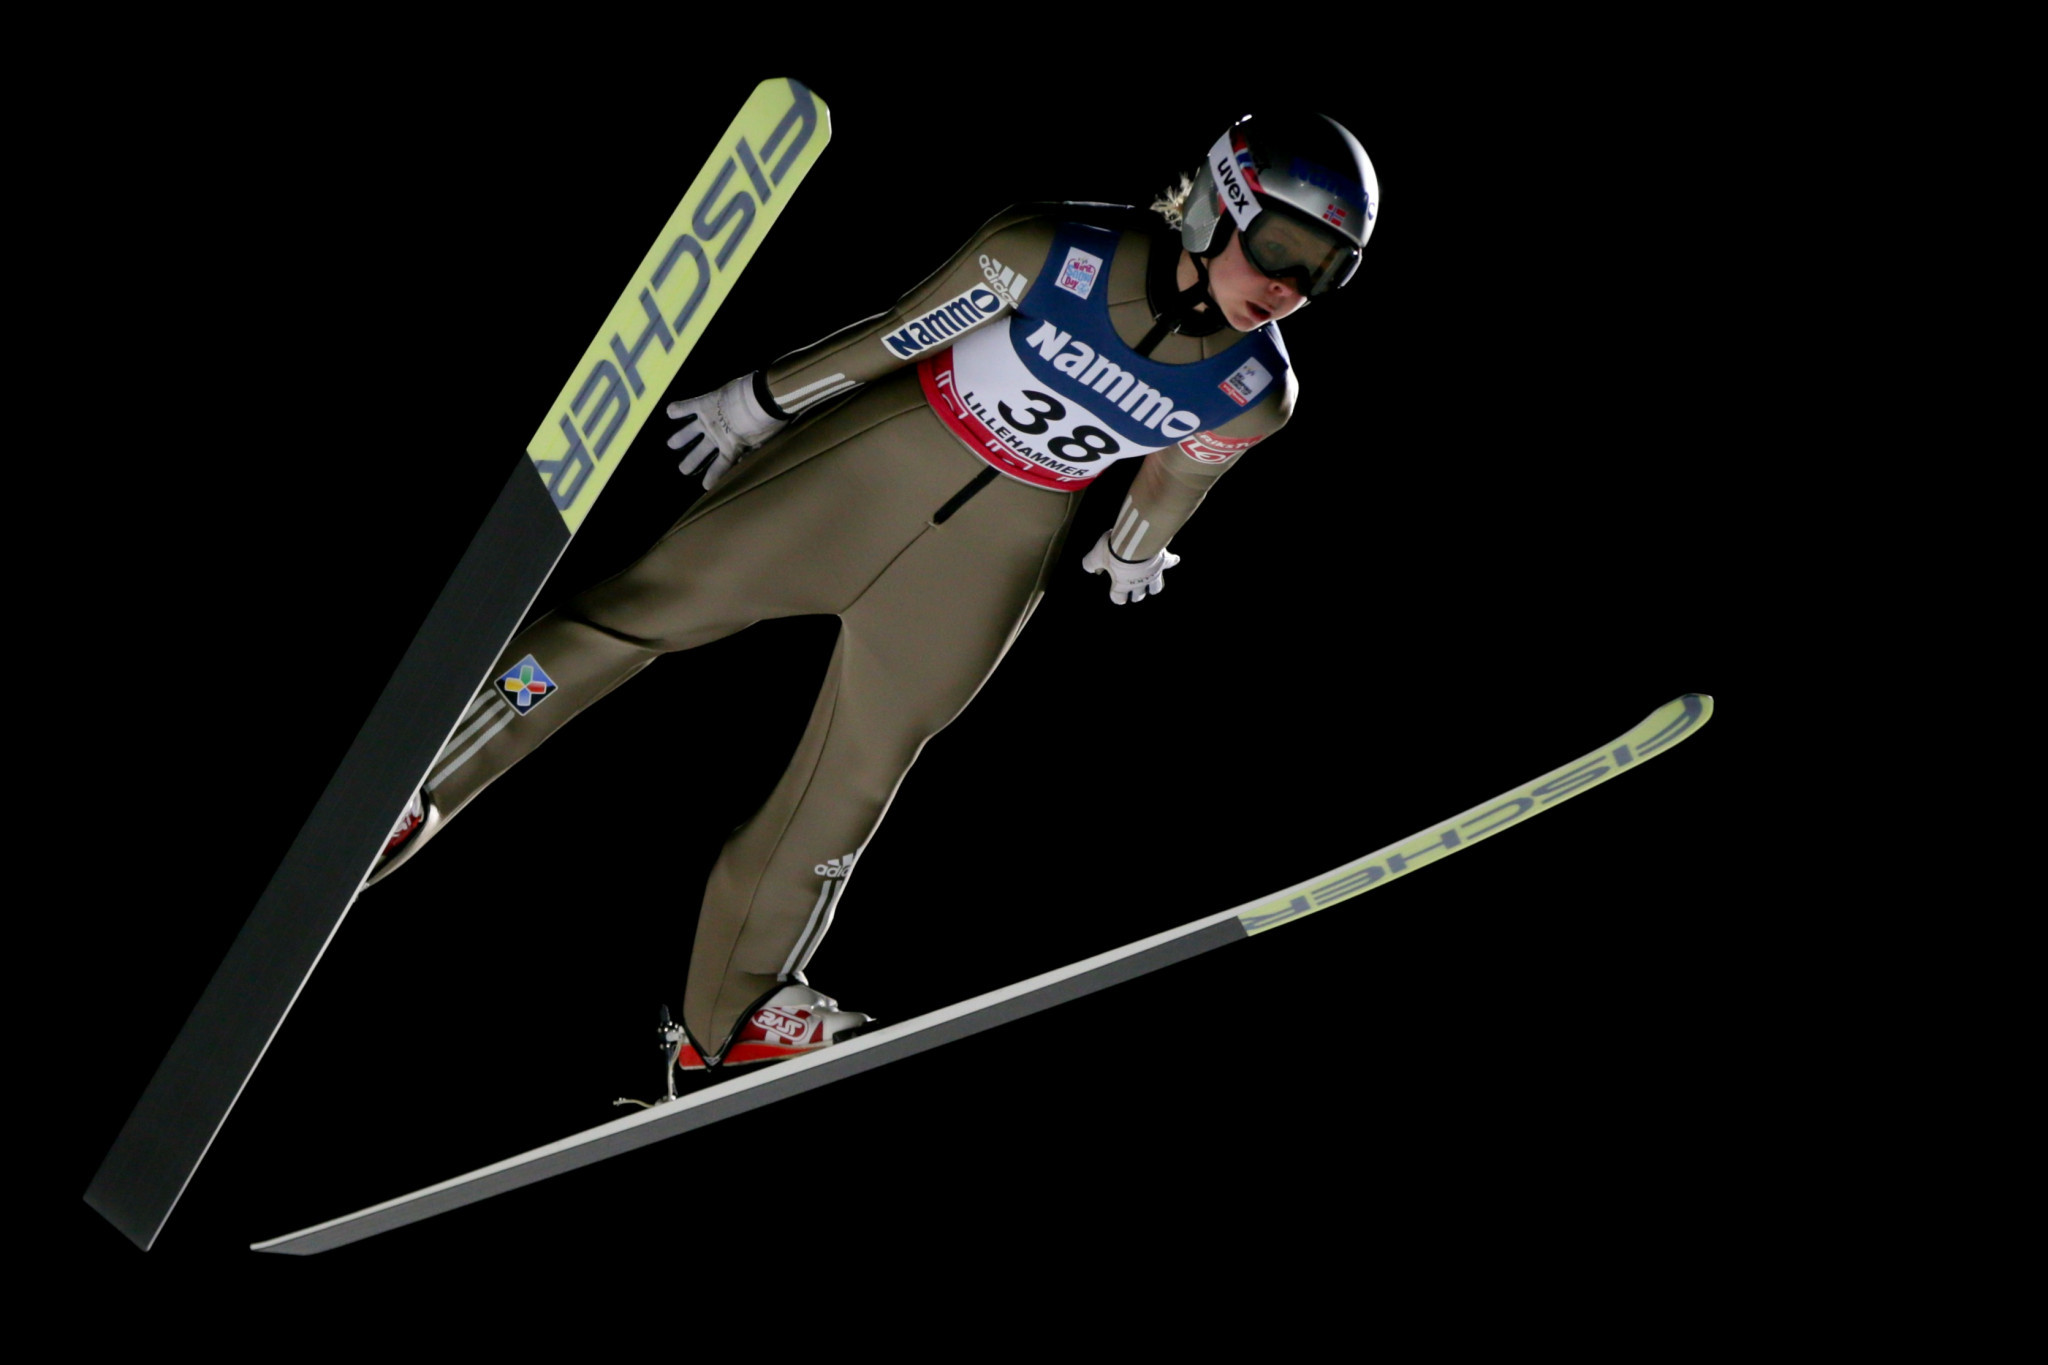 Norway's Maren Lundby leads the current women's Ski Jumping World Cup standings ©Getty Images